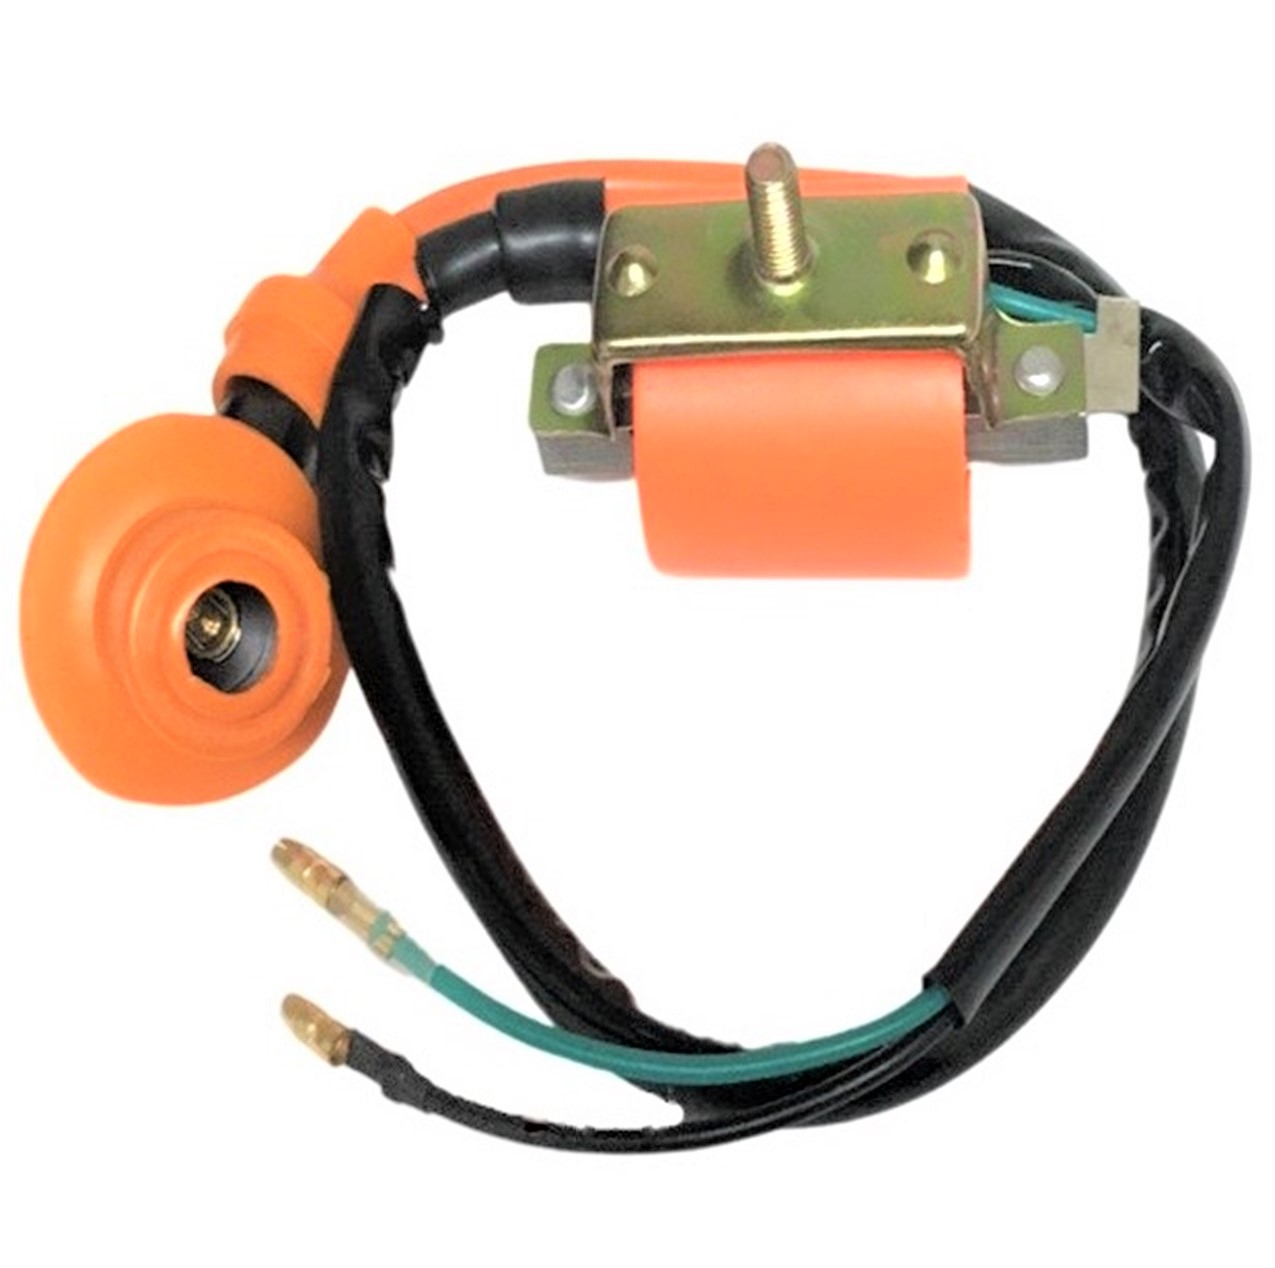 High Performance Ignition Coil Fits Most 50-125cc ATVs & DirtBikes with the Honda Copy Engine. 2 Wire Bullet Connectors